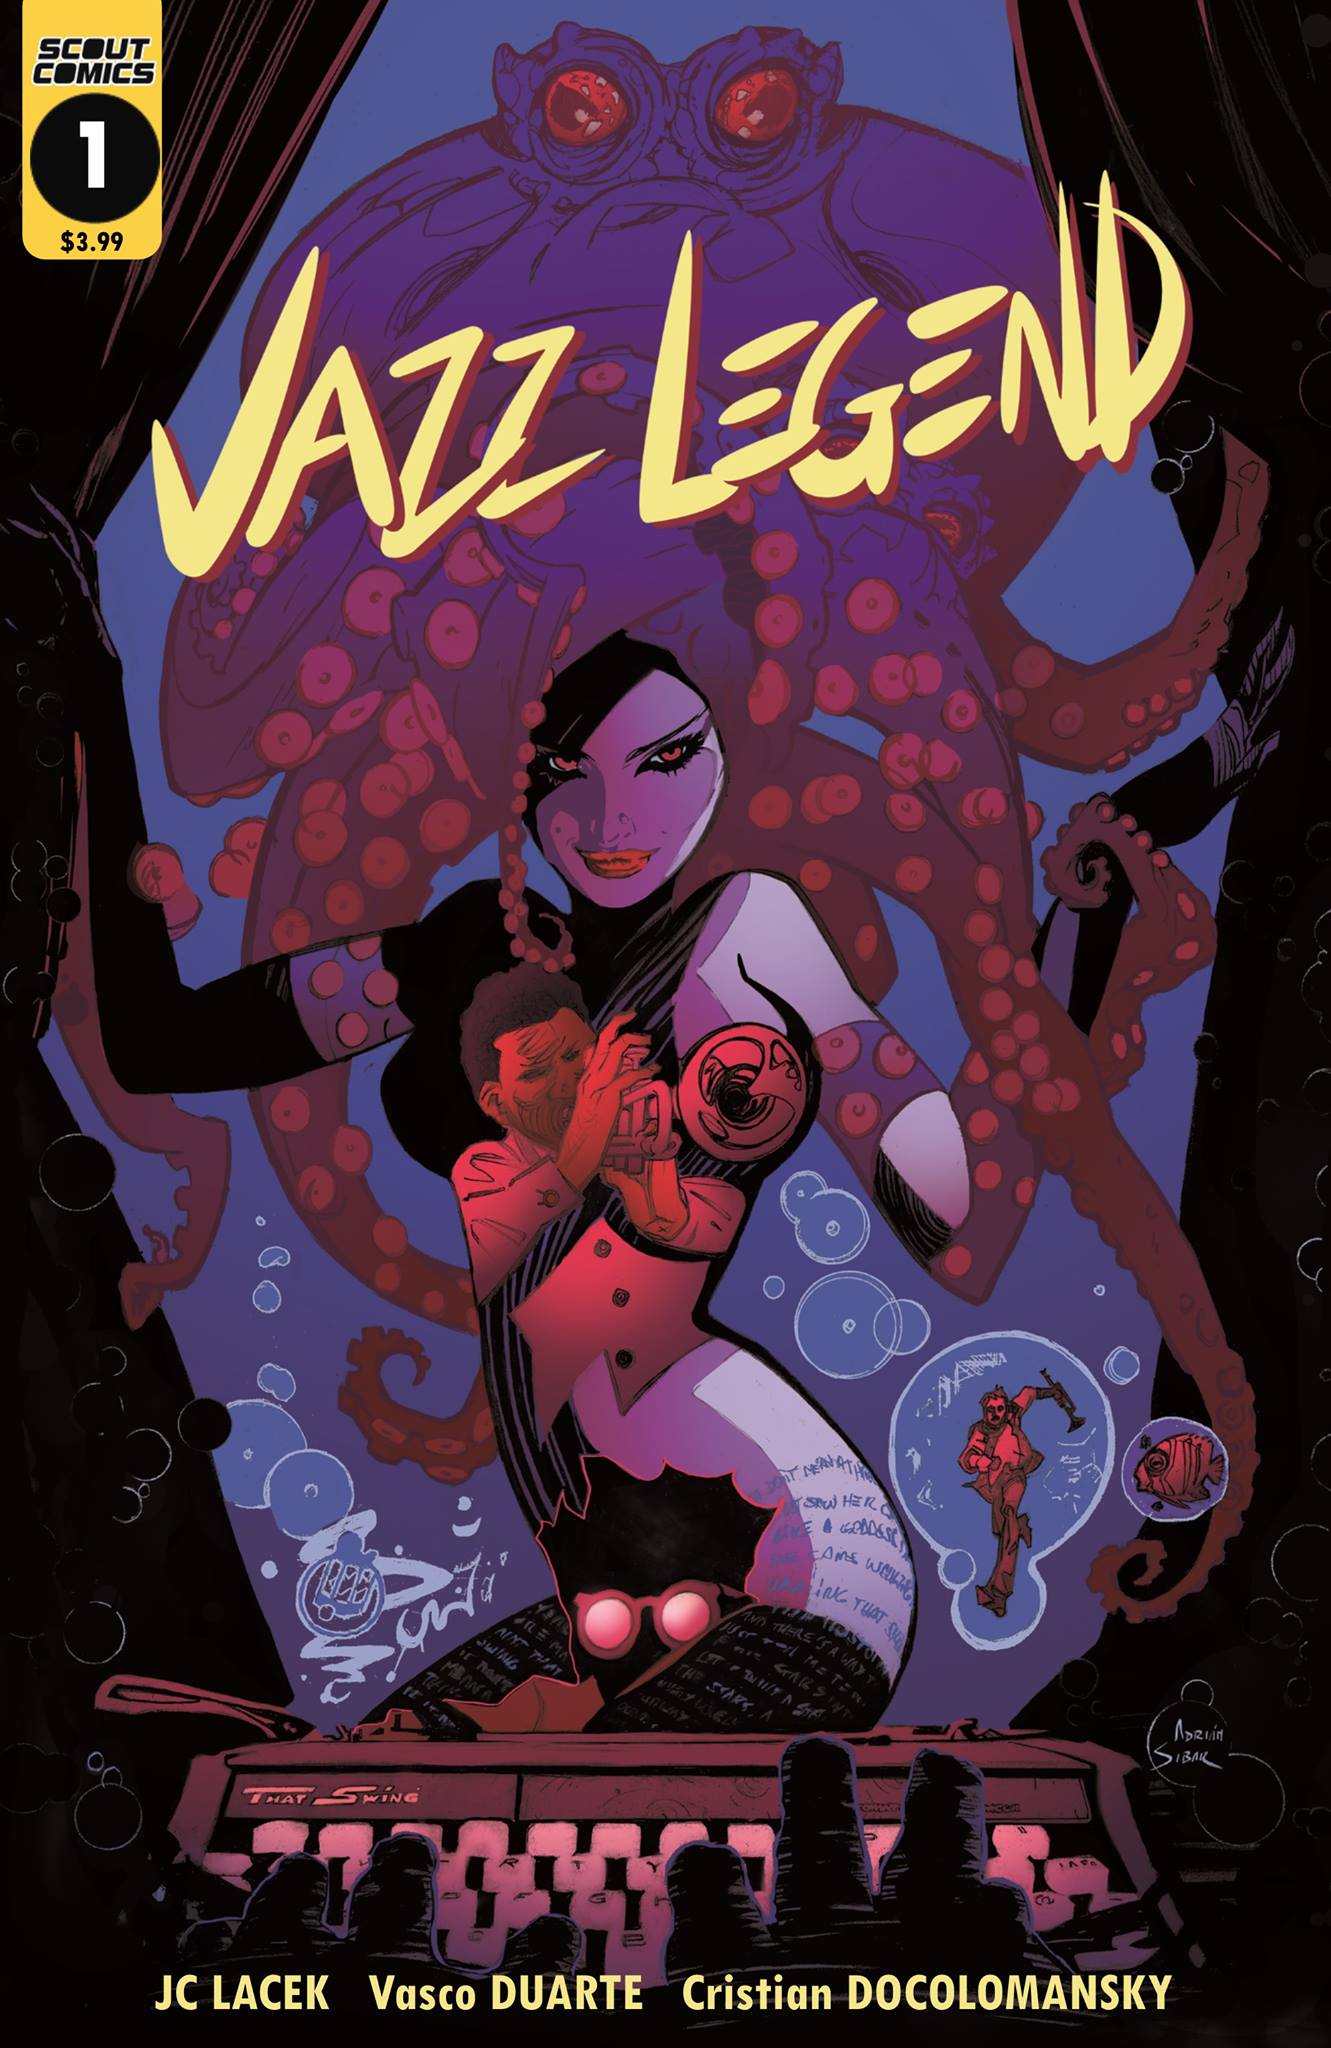 Psychedelic artwork of a naked woman, a jazz player, and an octopus like creature, with the title "Jazz Legend"